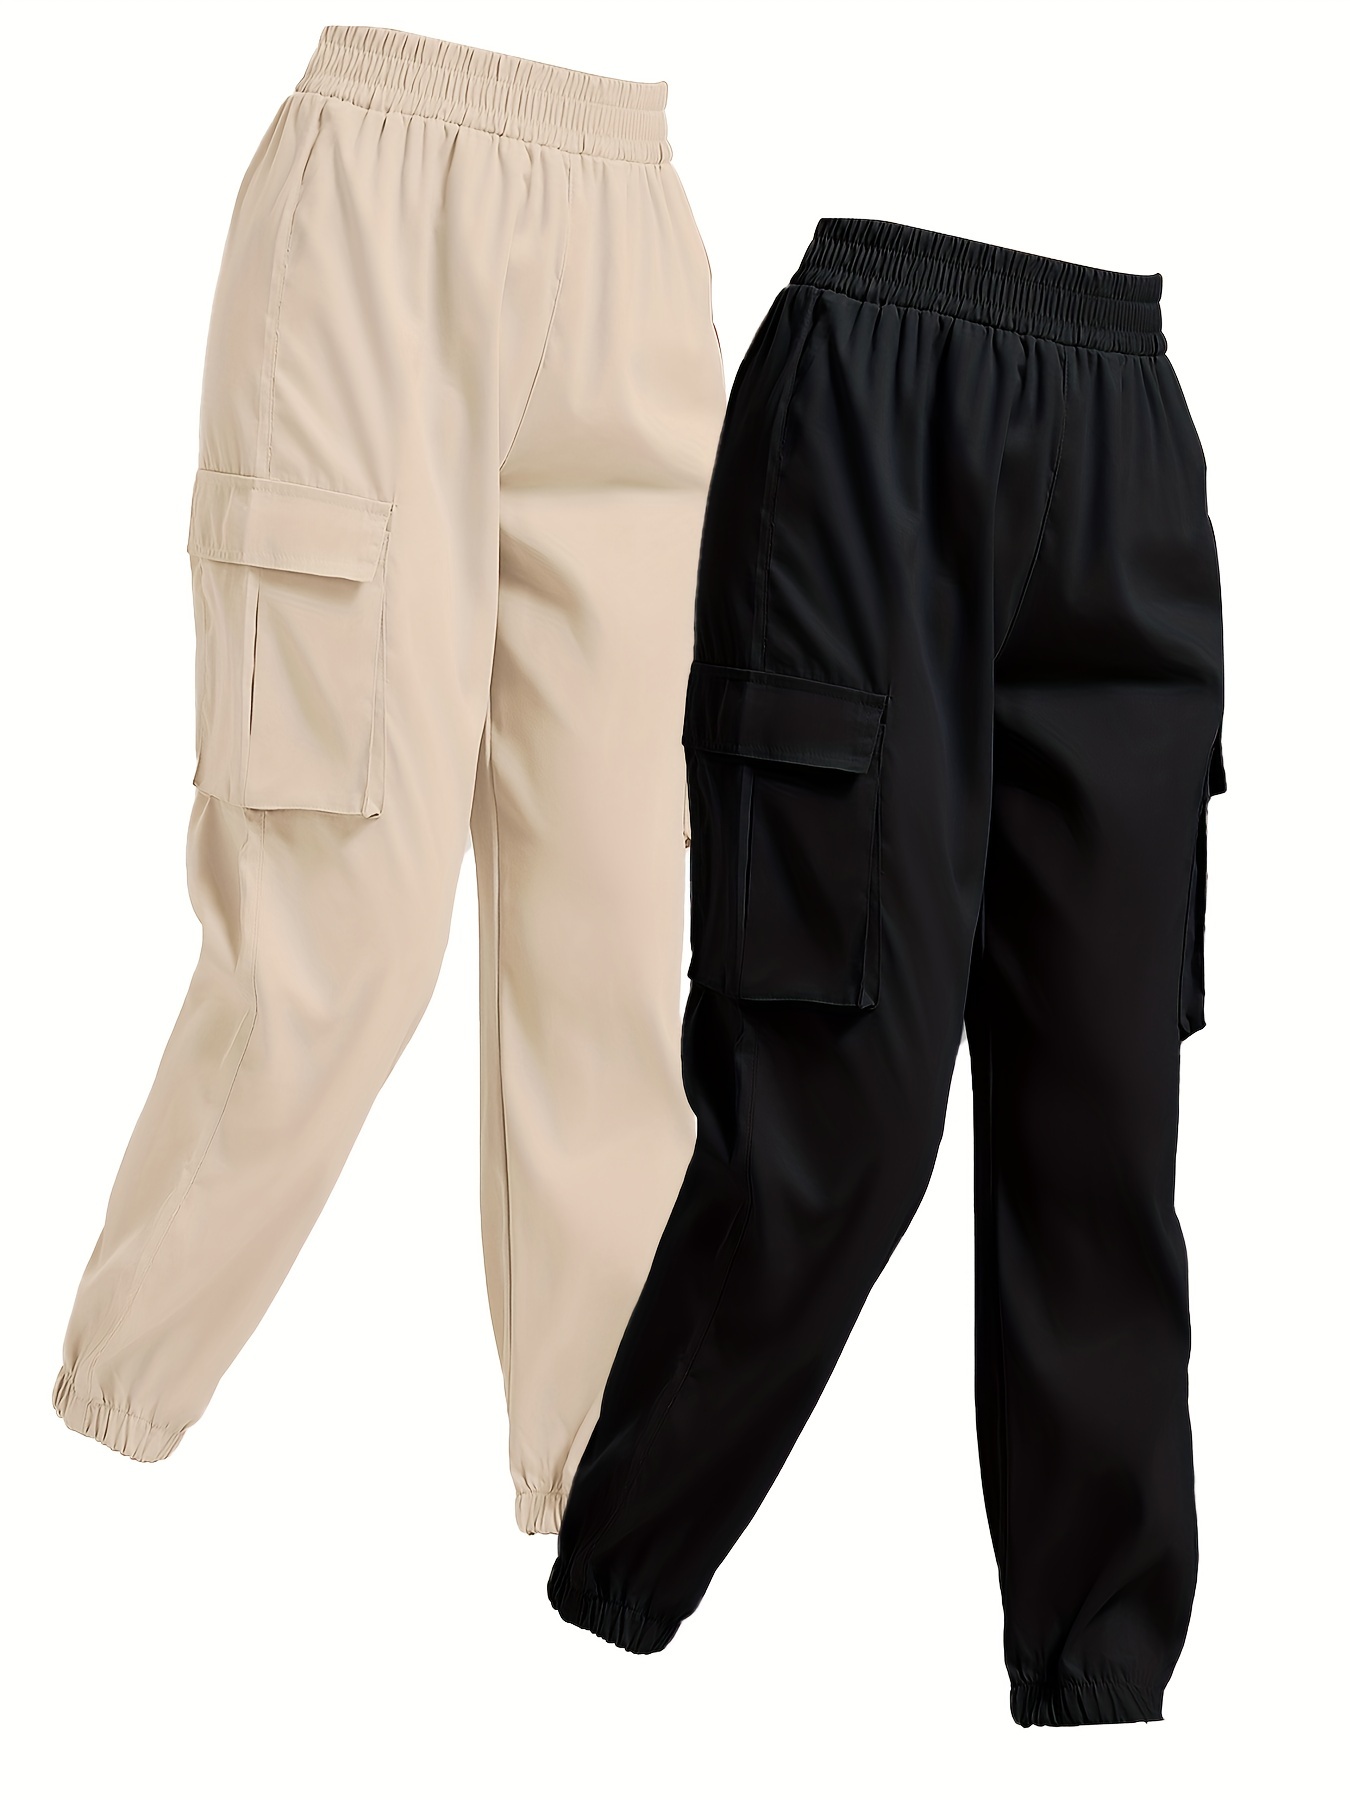 solid jogger cargo pants 2 pack casual flap pocket elastic waist pants womens clothing details 19